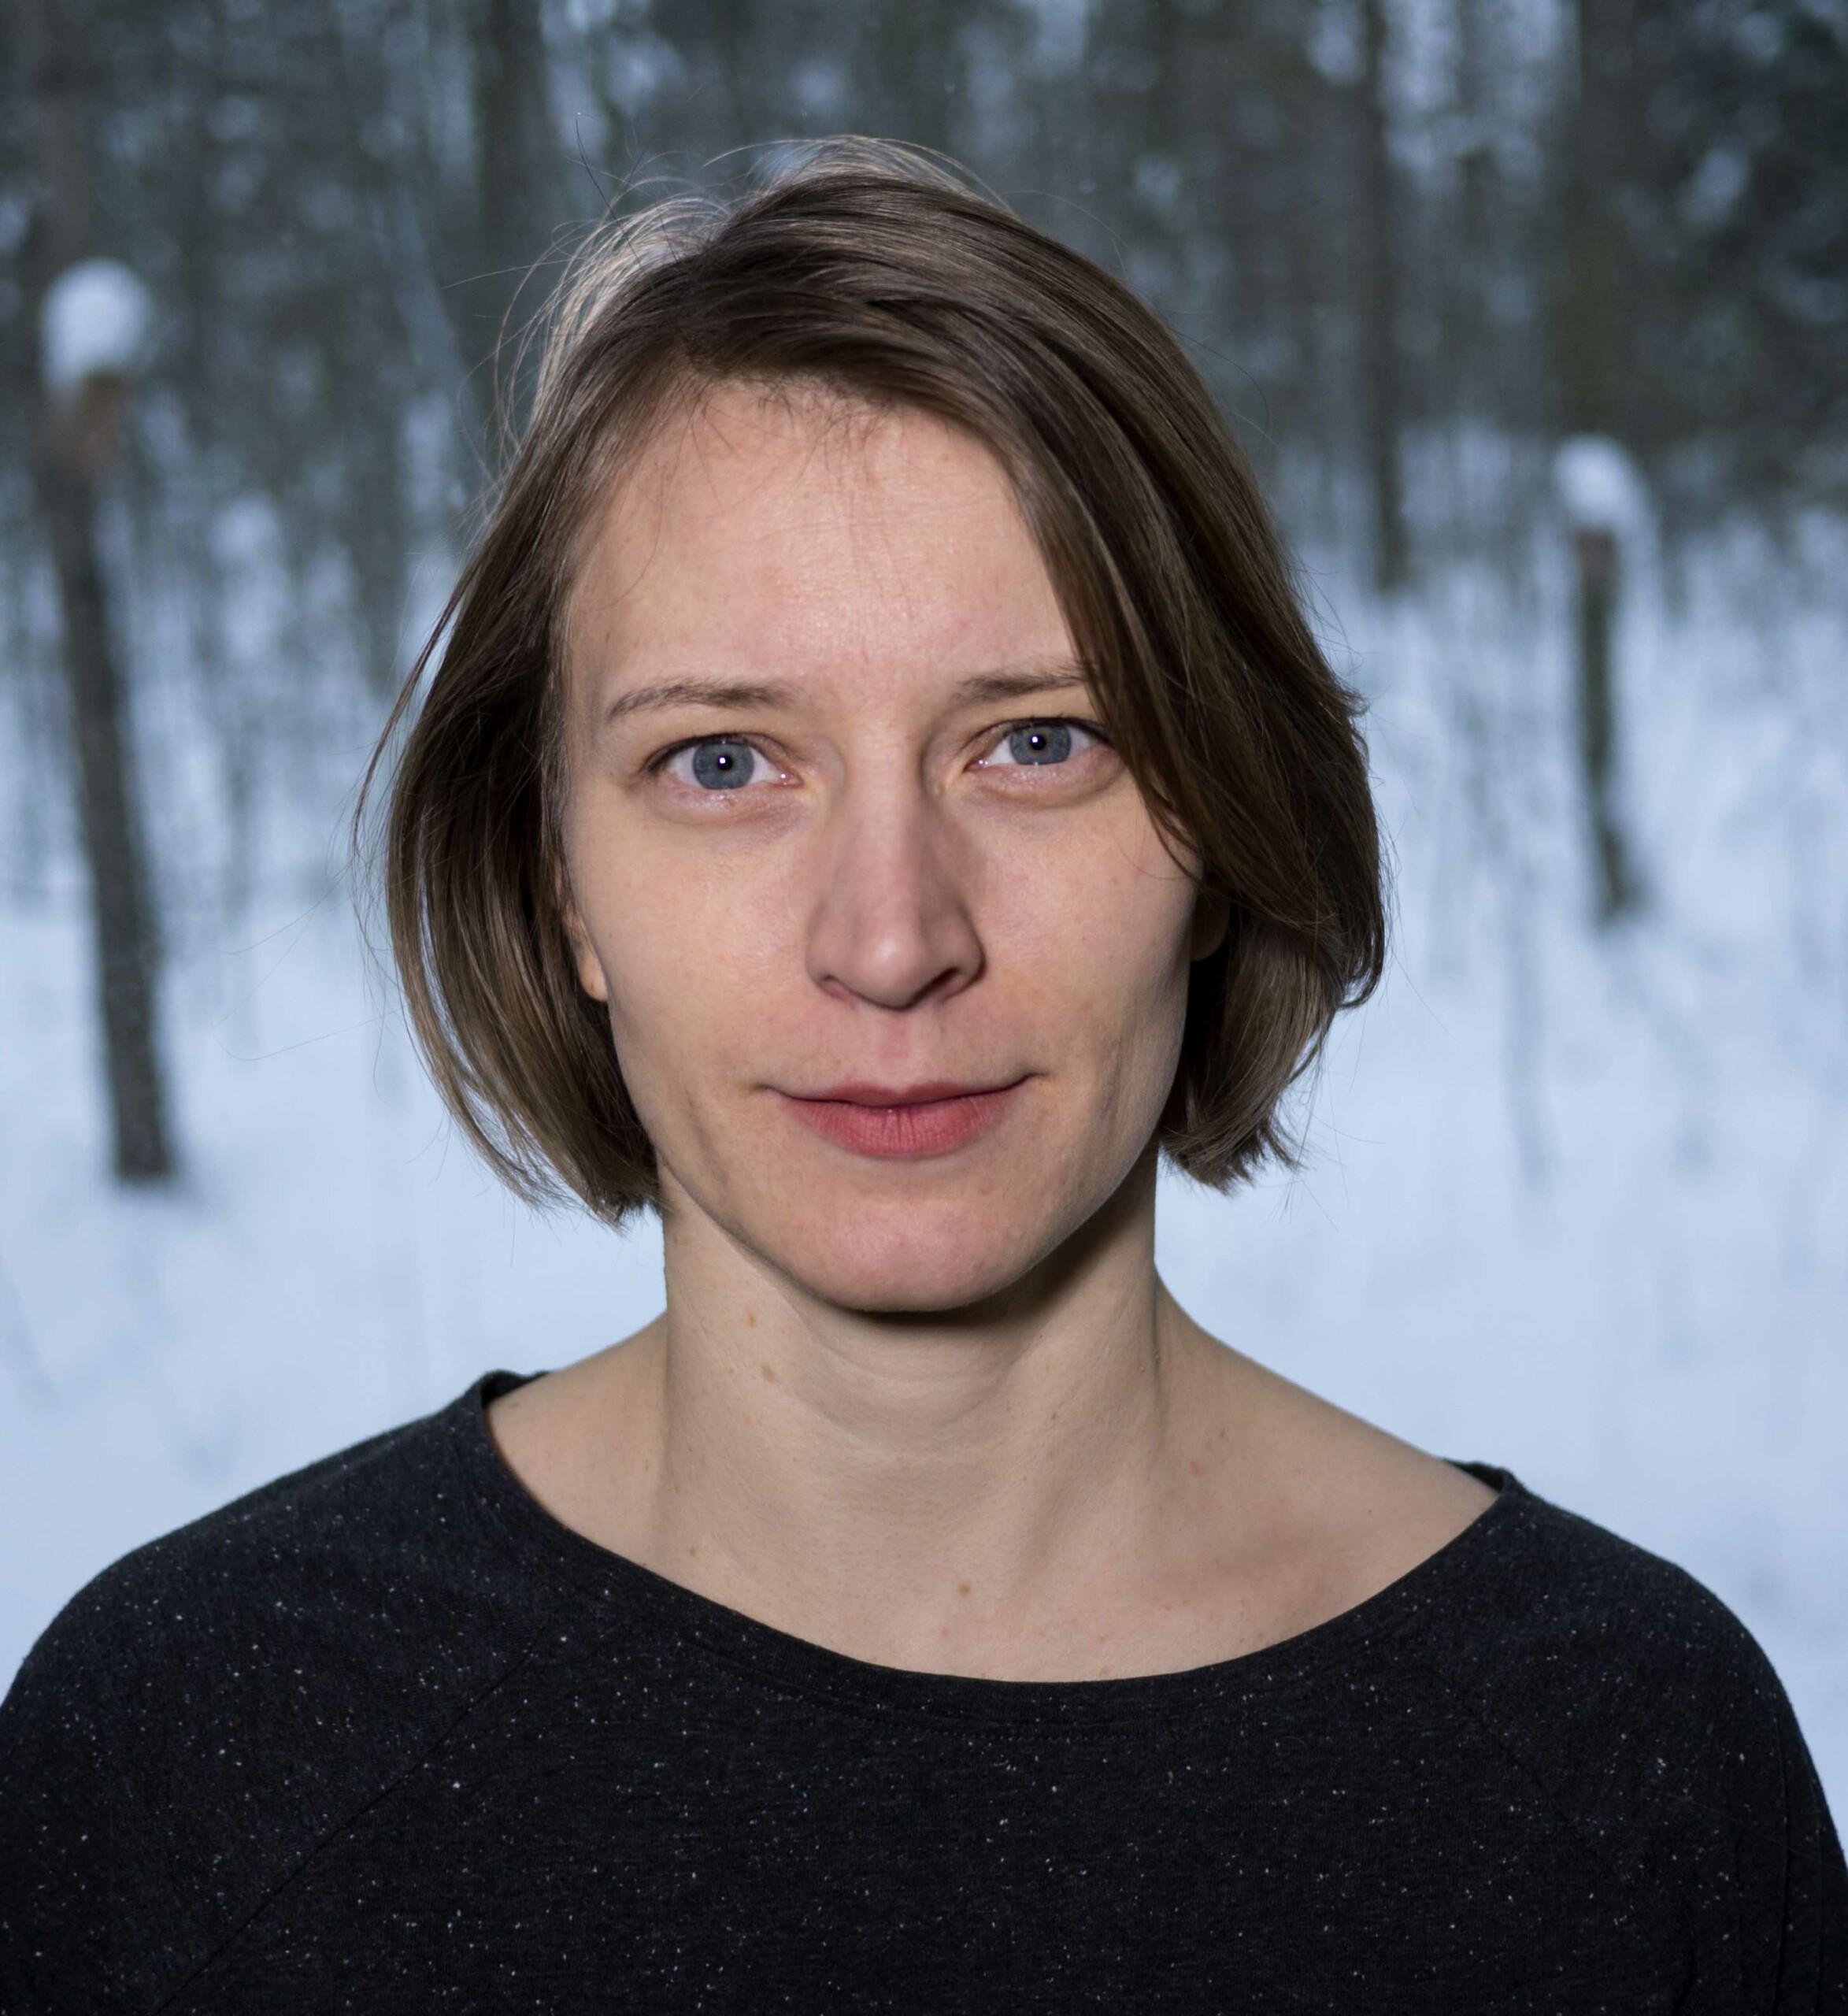 A portrait of a person with a black shirt and short brown hair. In the background you can see a wintery forest.